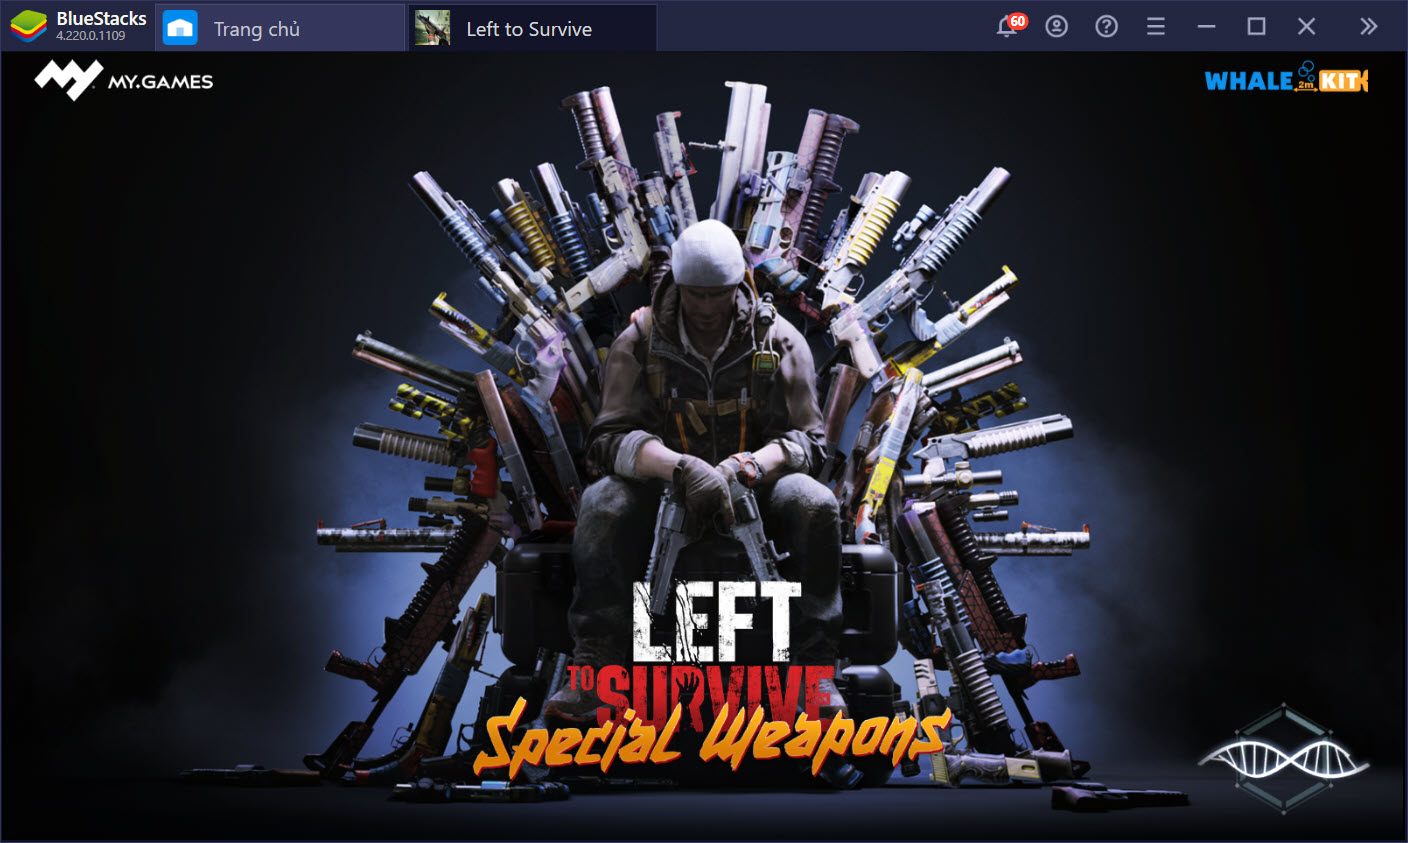 Sinh tồn trong thế giới Left to Survive: Dead Zombie cùng BlueStacks